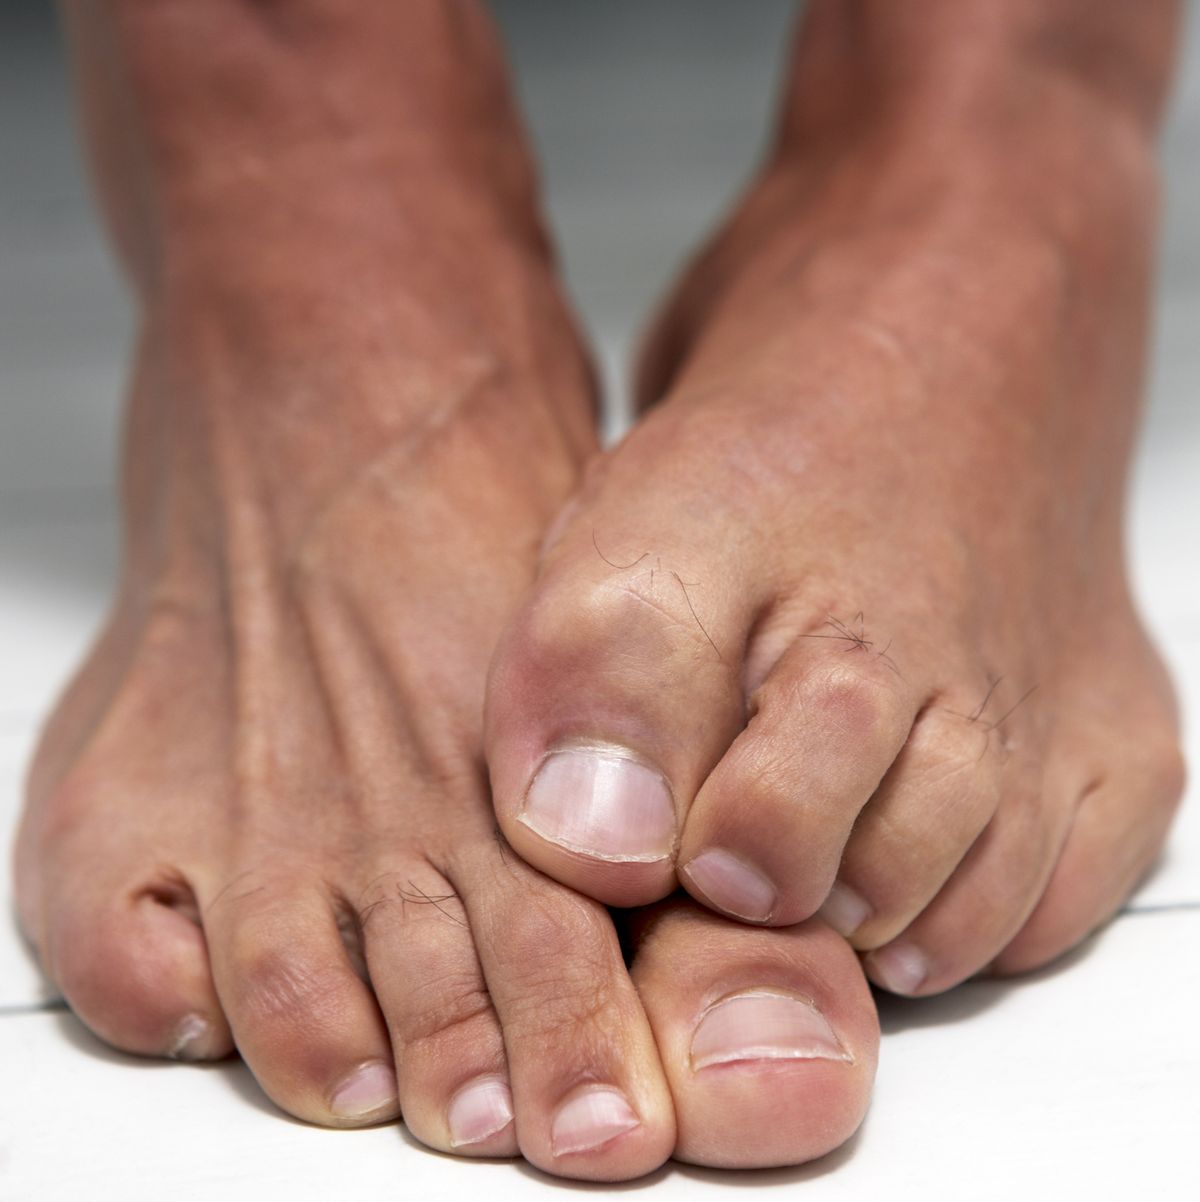 Toe amputation: causes, surgery, recovery and complications